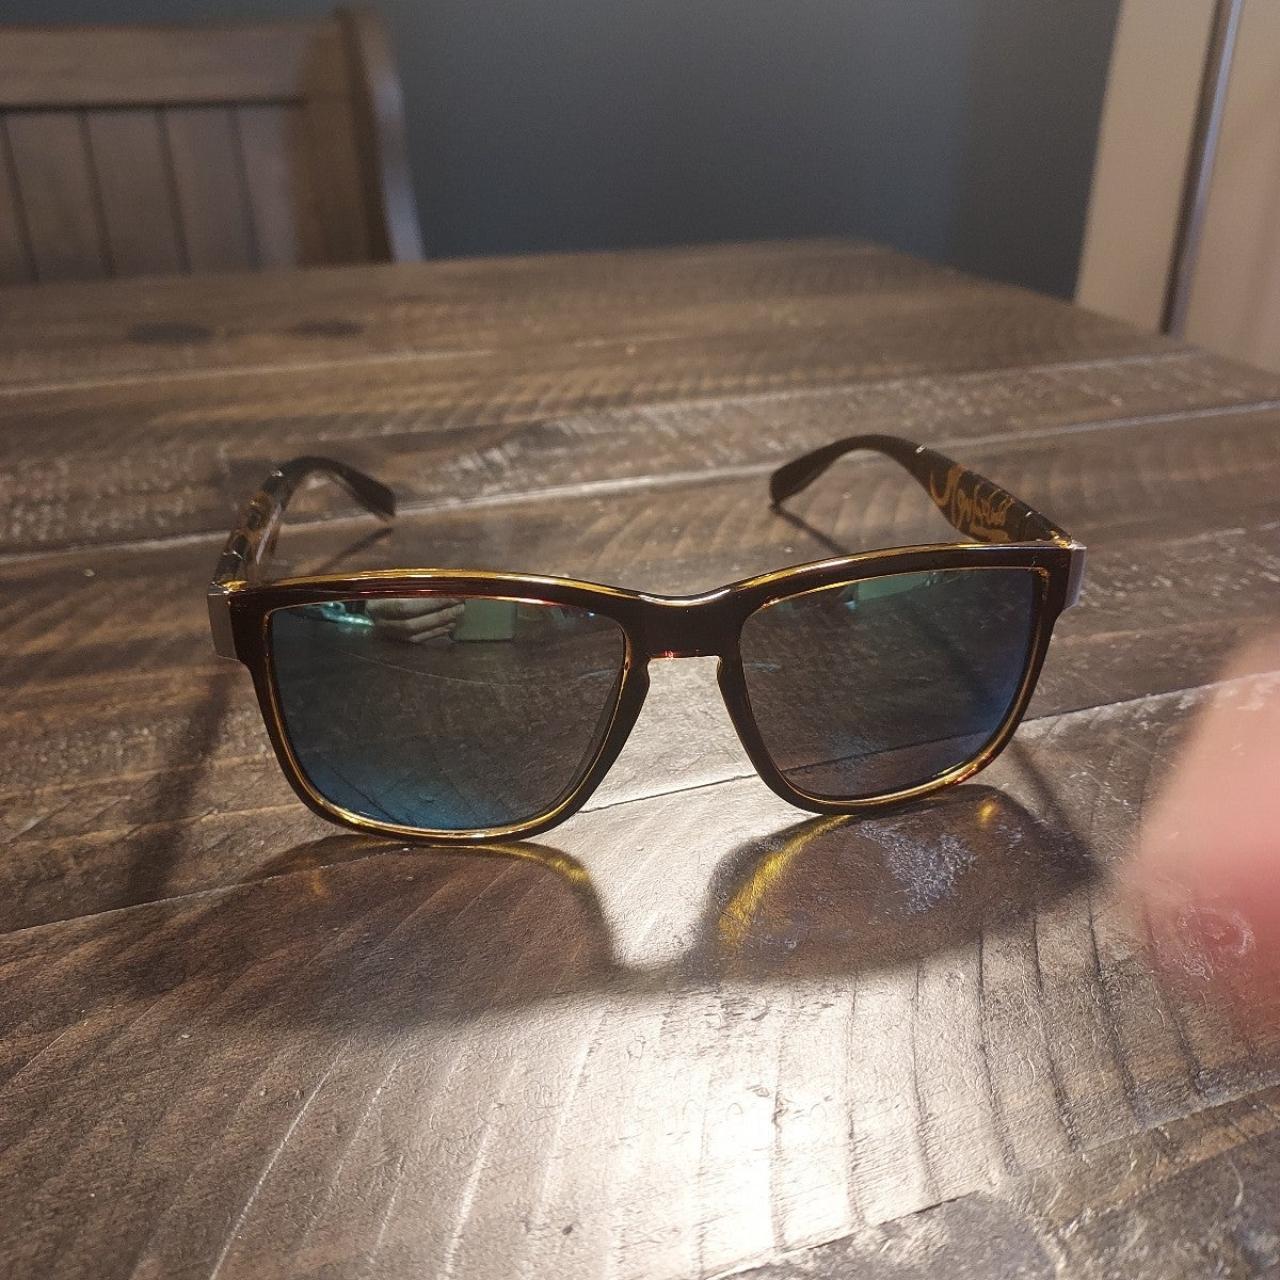 Quiksilver Men's Brown and Gold Sunglasses (2)